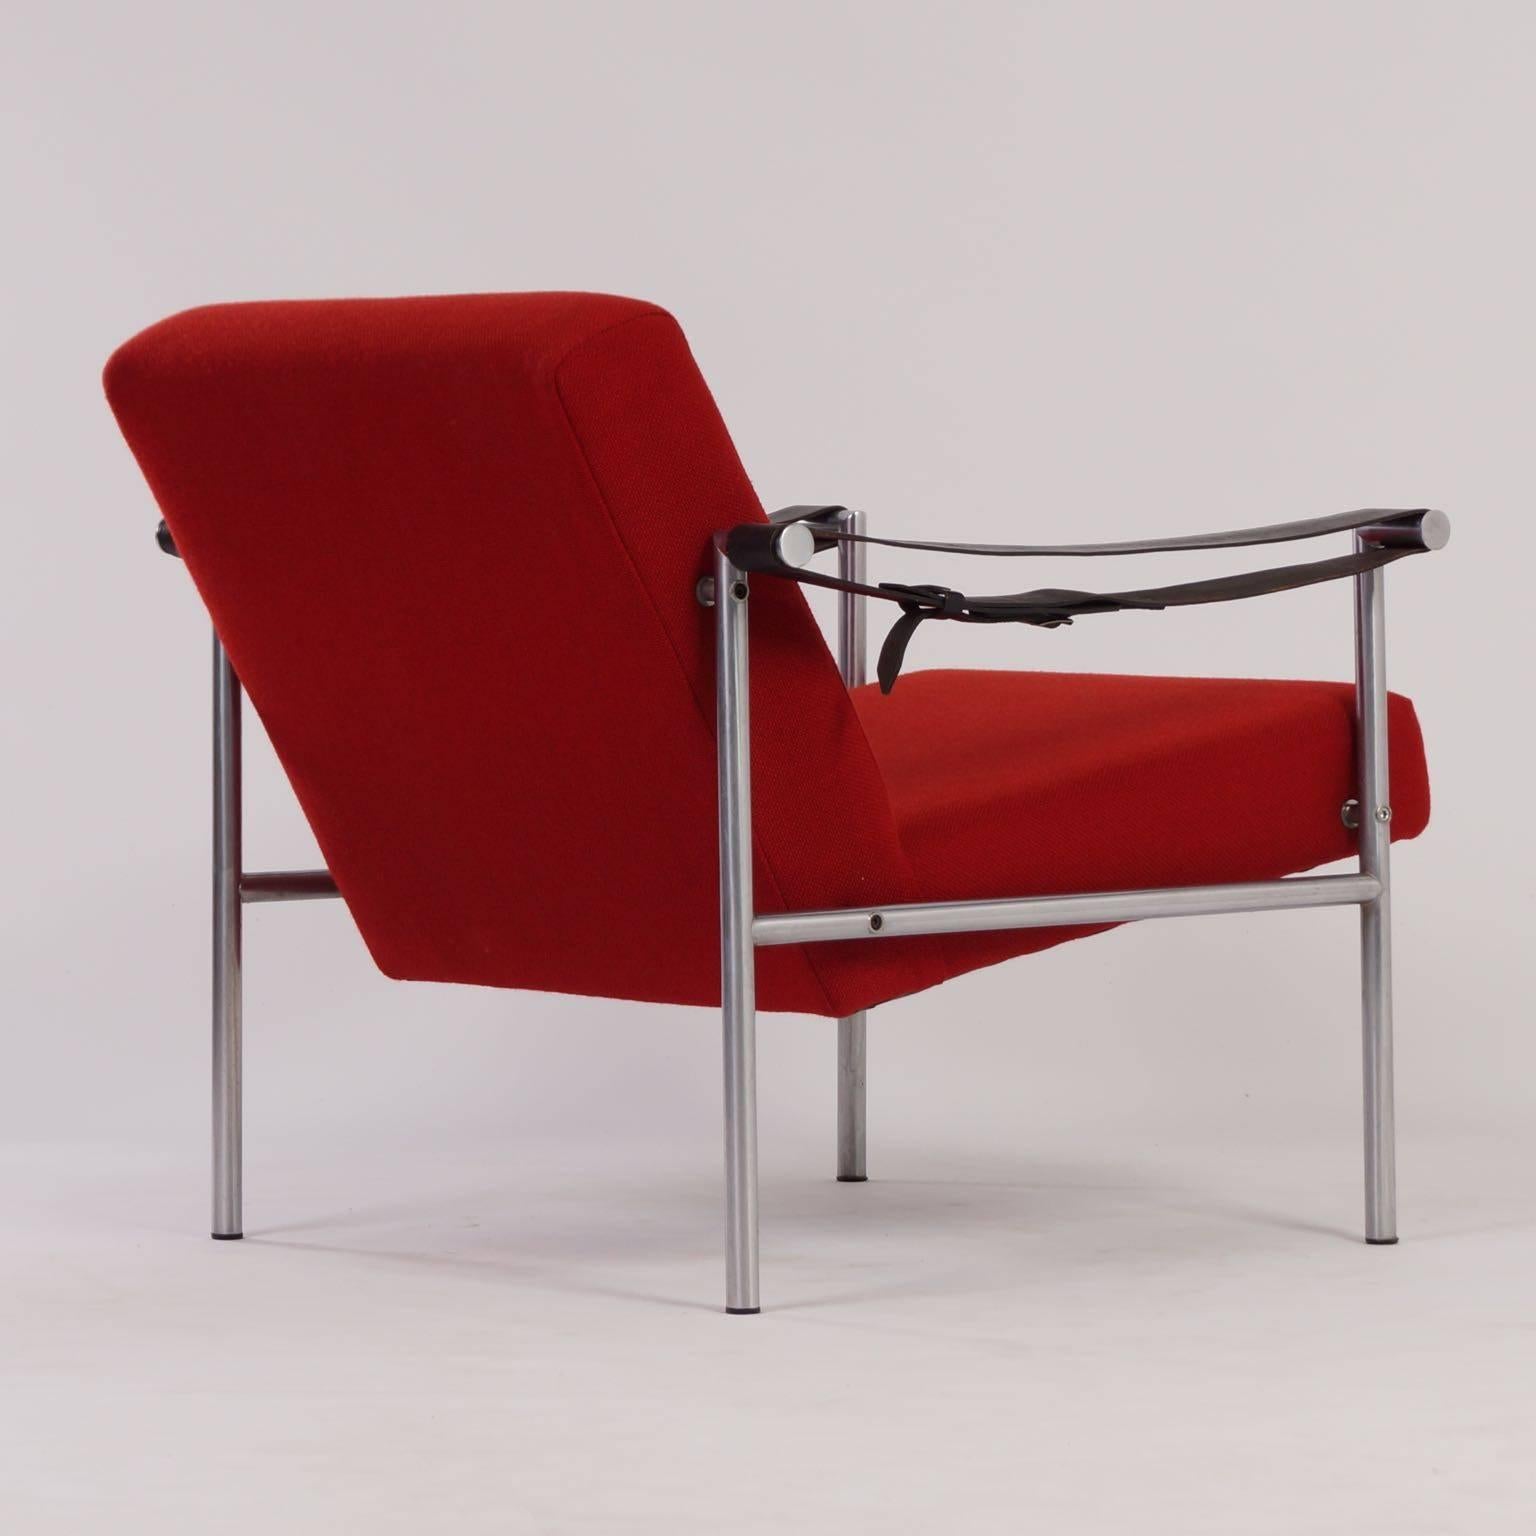 Mid-20th Century SZ 38 SZ 08 Armchairs by Martin Visser and Dick v.d. Net for ‘t Spectrum, 1960s